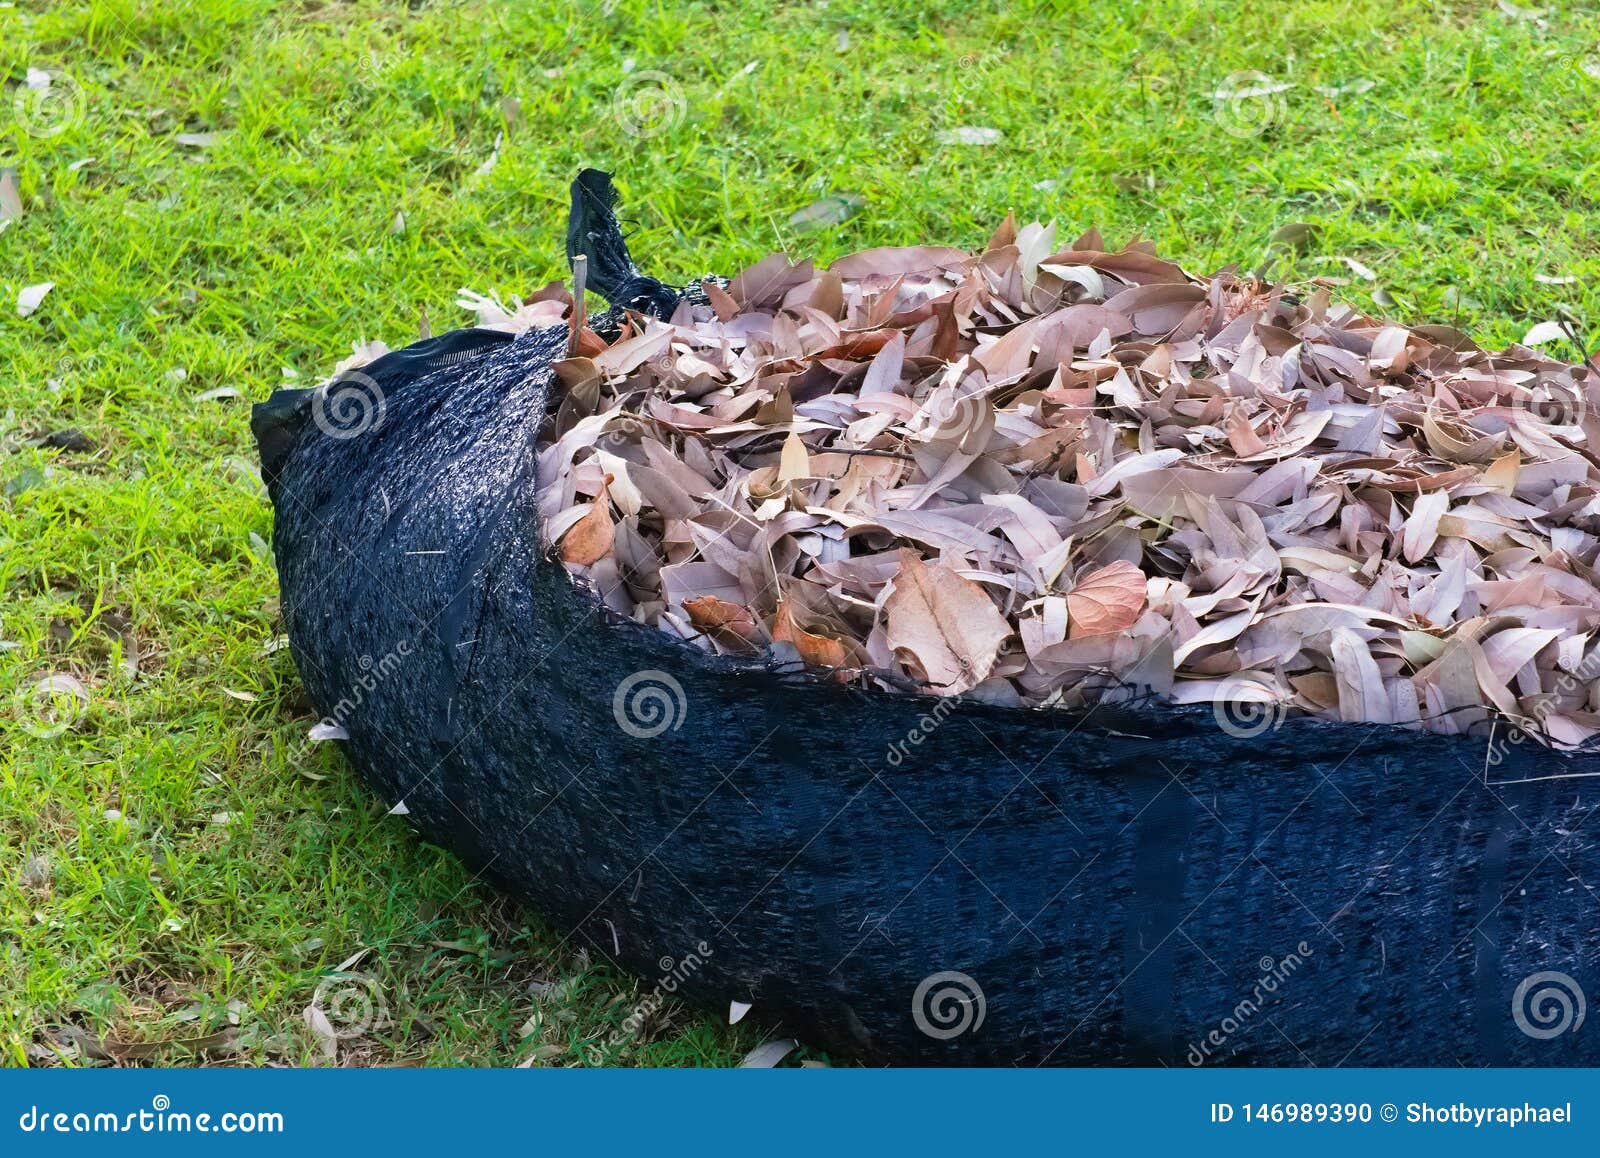 A Black Plastic Weaved Tarp Filled With Brown Decaying Leaves